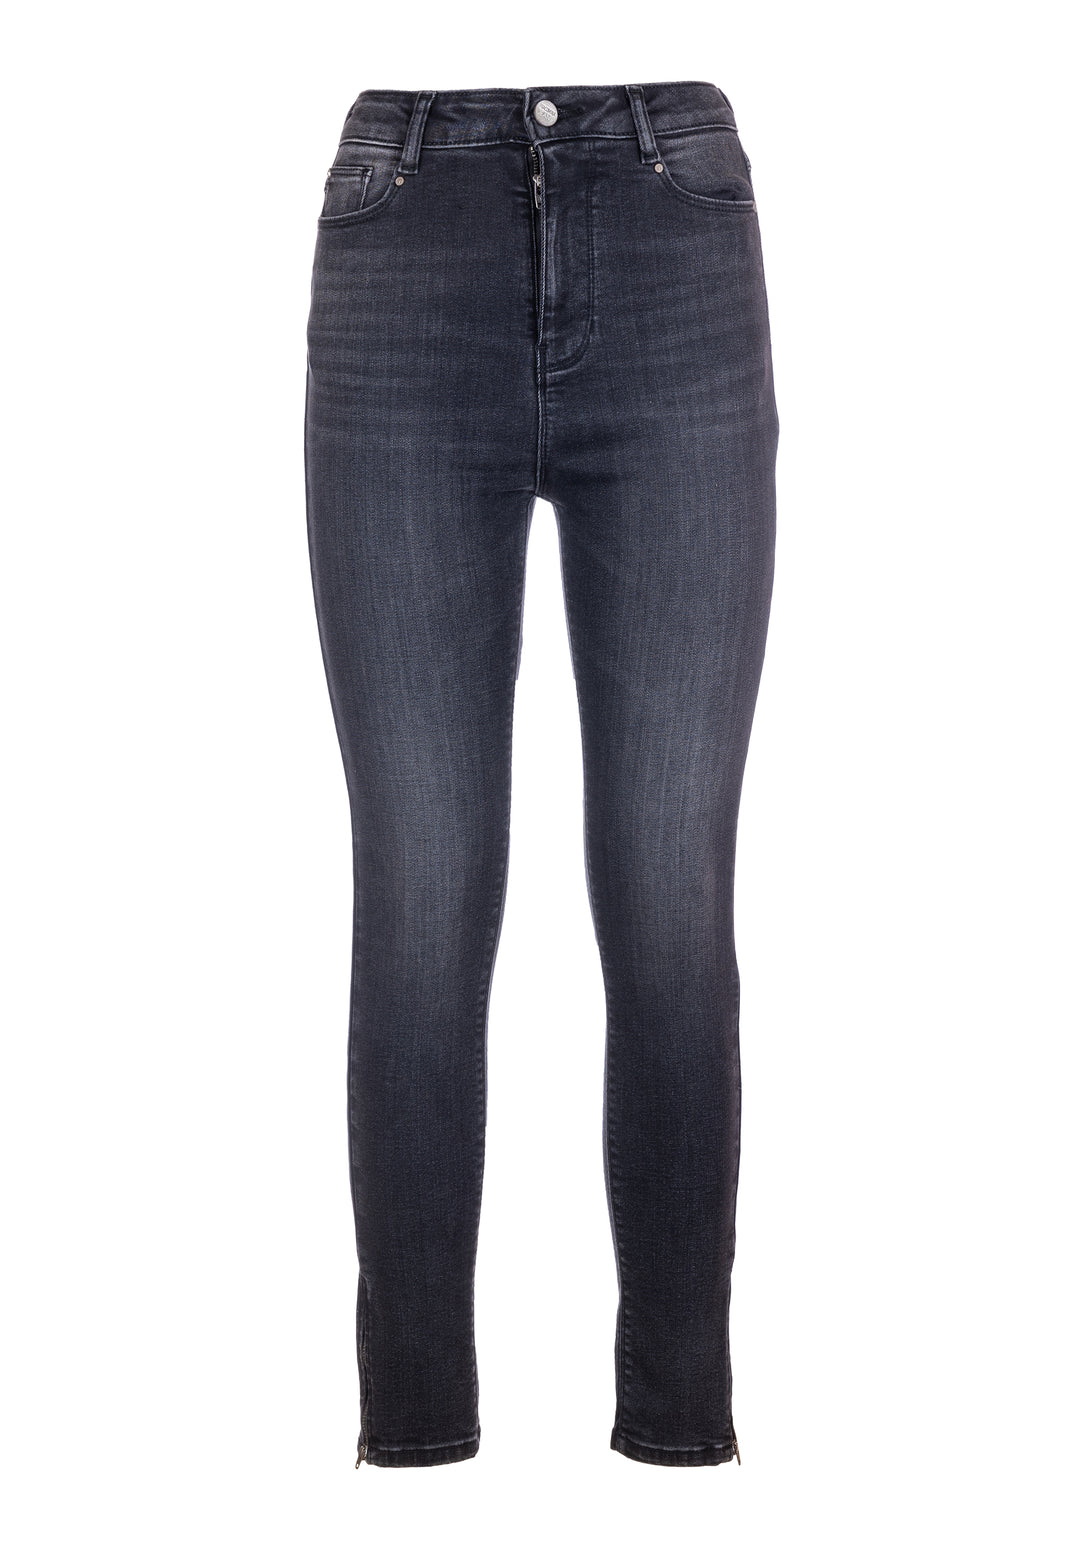 Jeans slim fit made in black denim with middle wash